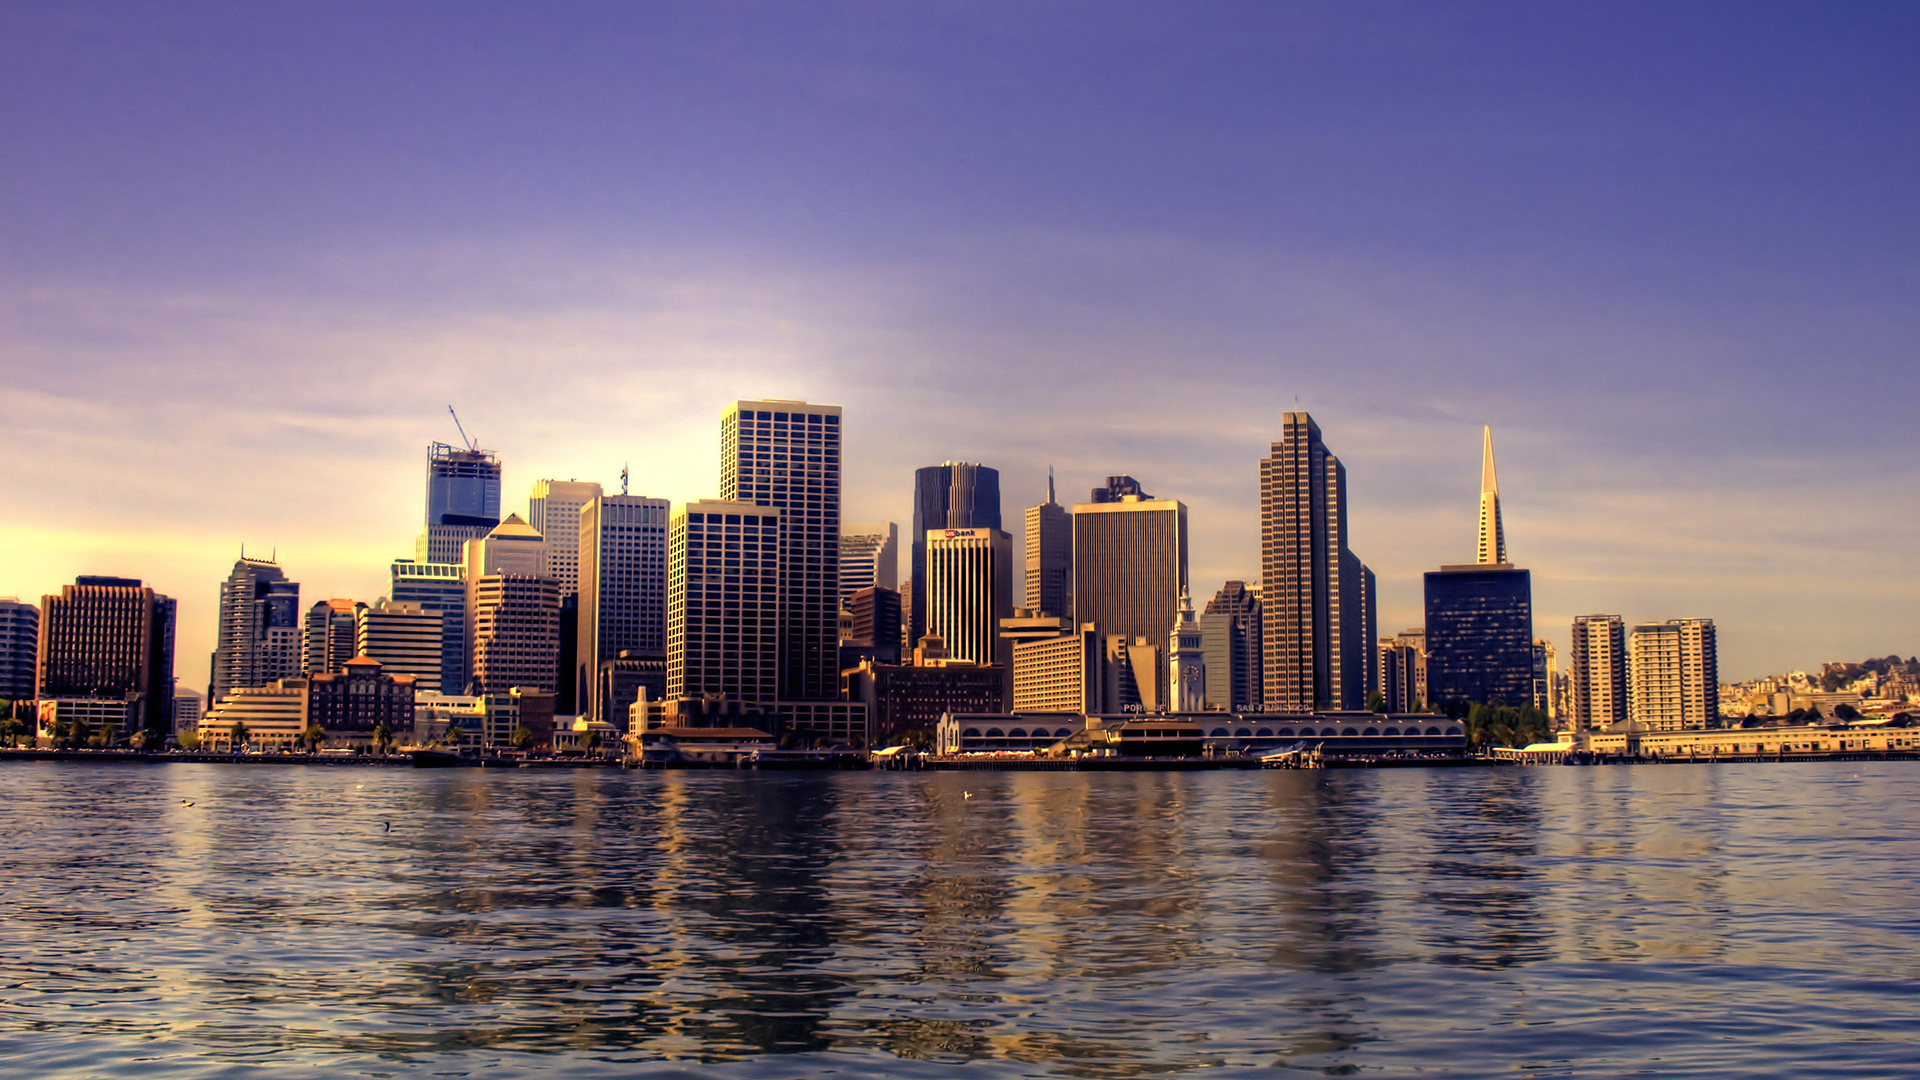 City: San Francisco, A commercial and cultural center in the northern region of the US state of California. 1920x1080 Full HD Background.